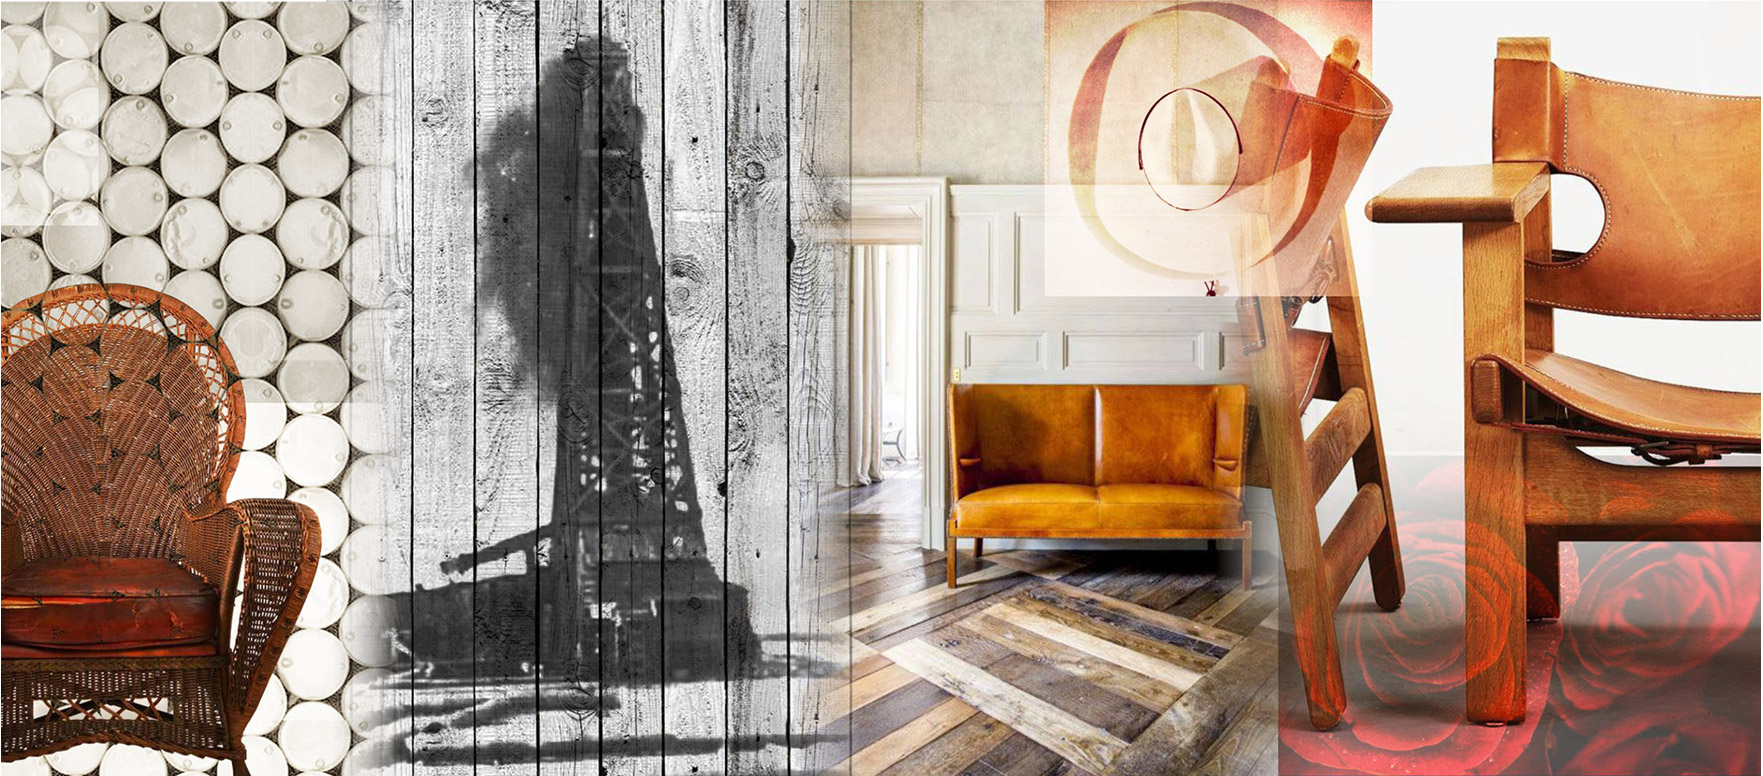 Mood board for Hotel Santa Rita oil rig, three brown leather chairs, and a wicker chair.